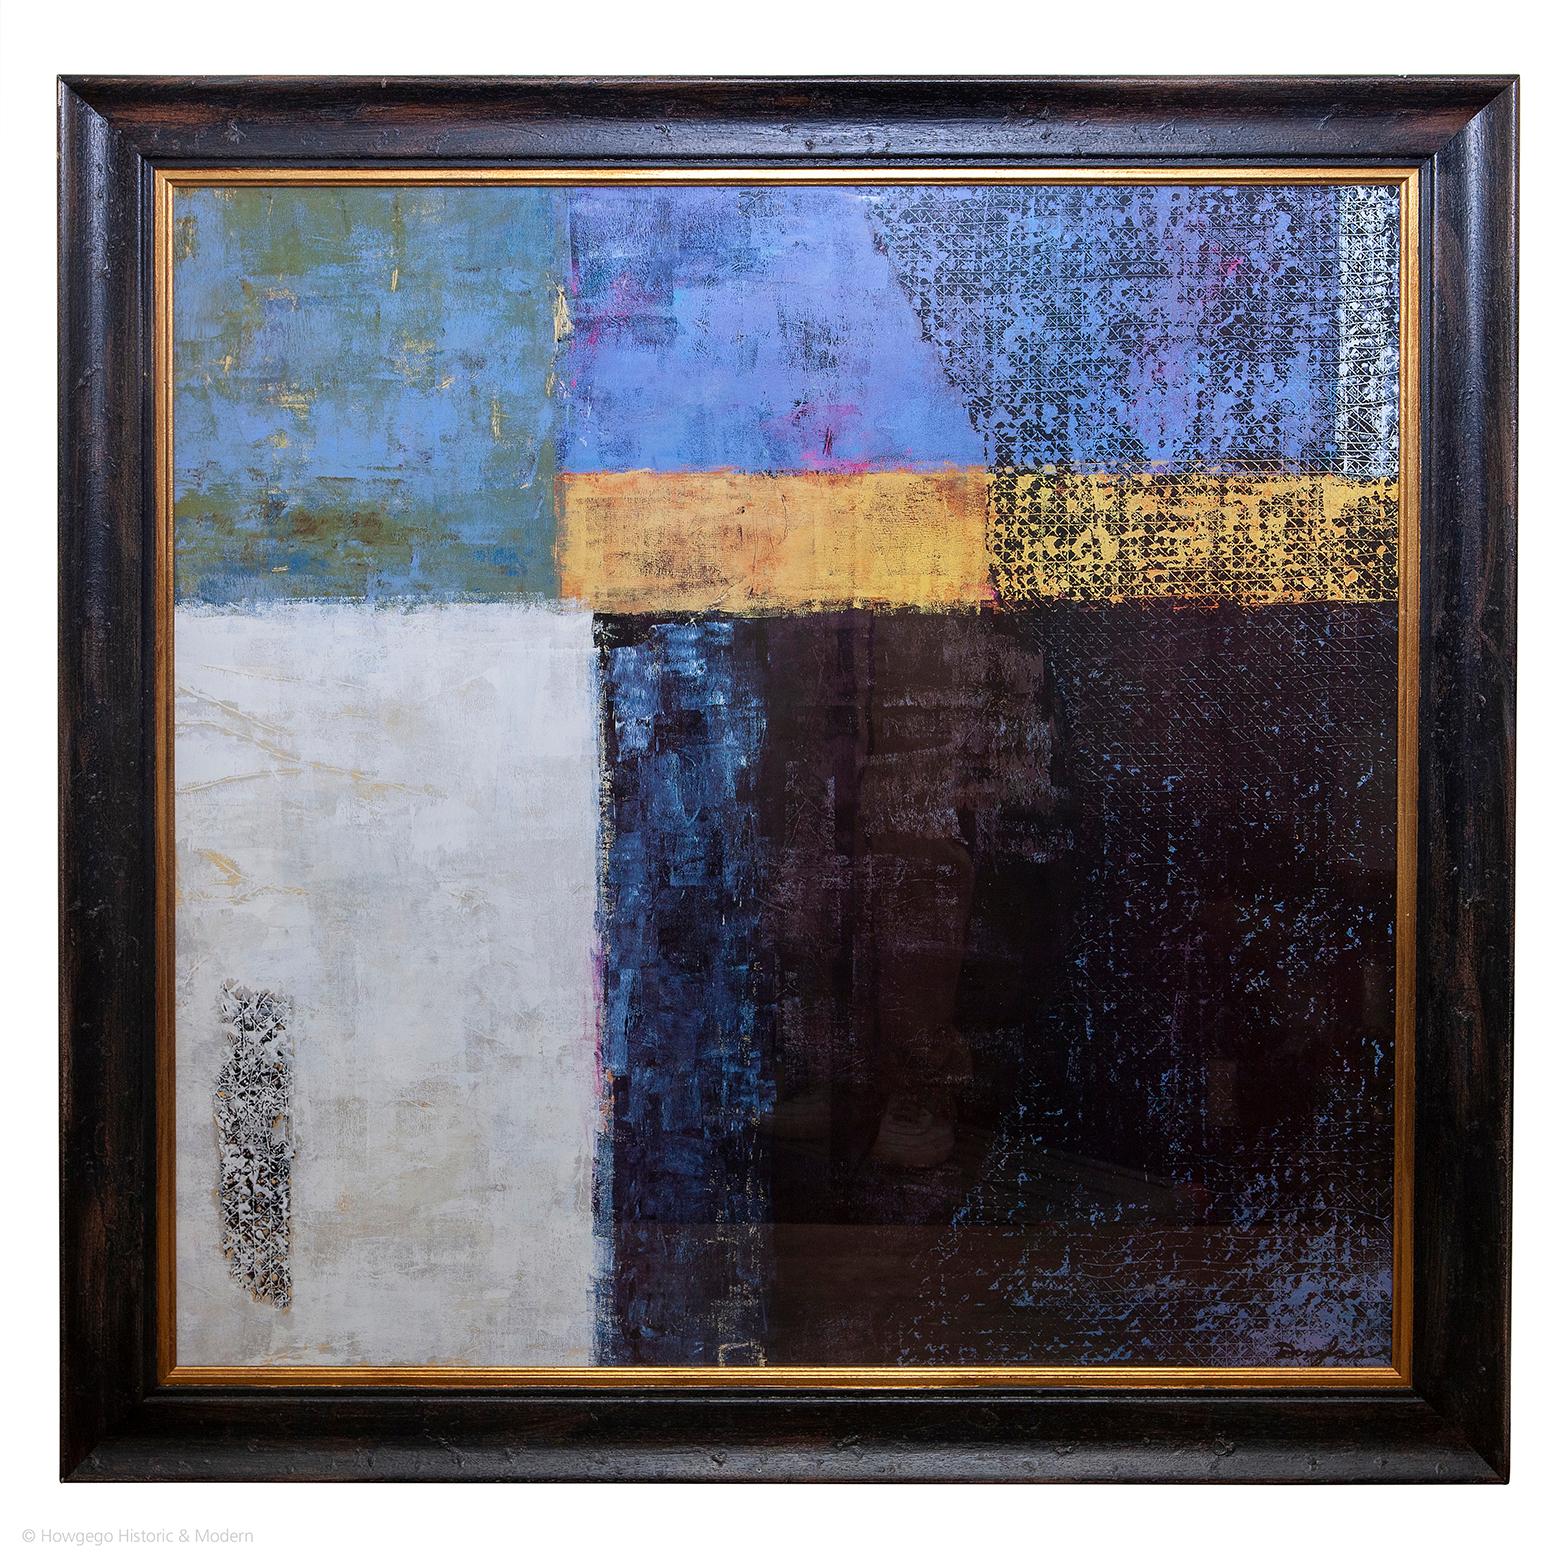 Doylan : filtration, mixed media, signed lower right
41” square
Striking, decorative, contemporary, abstract, mixed media work, highly textured
Composition exploring the qualities and textures of filtration through shape, positioning, texture and